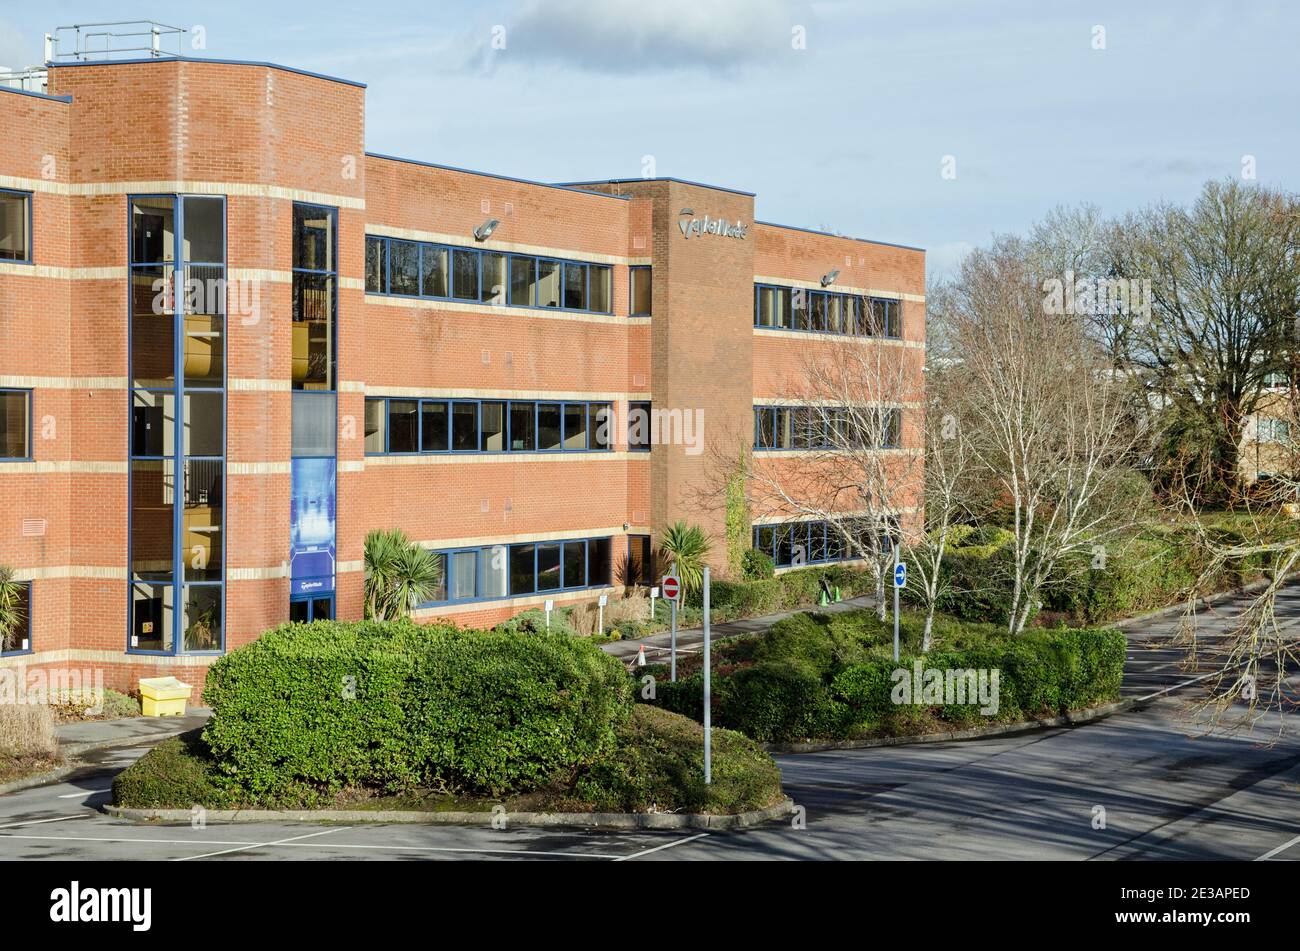 Basingstoke, UK - January 17, 2021: Headquarters of the golf equipment  company TaylorMade in the Viables business district of Basingstoke,  Hampshire Stock Photo - Alamy